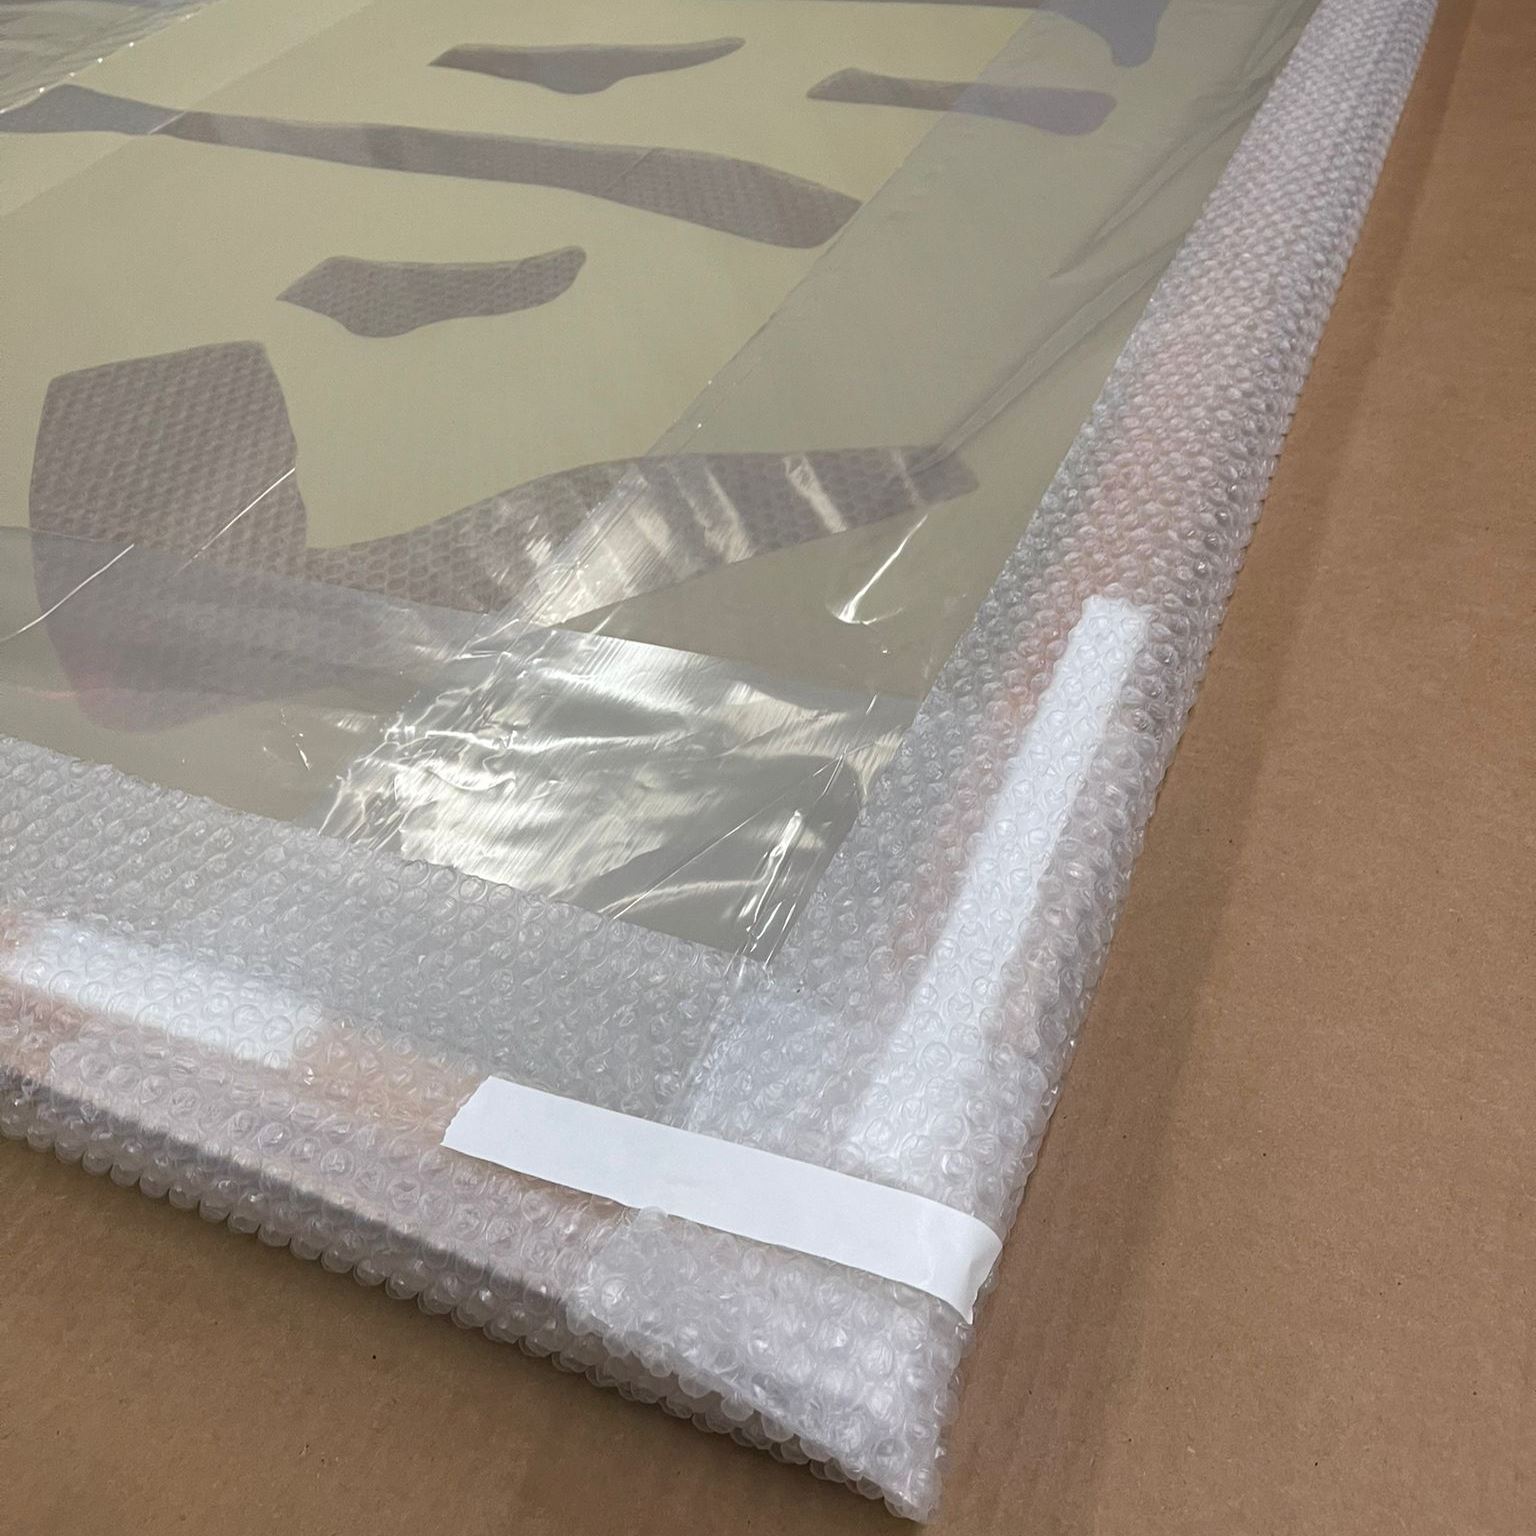 Packing a Painting for Shipping Avoid These Three Materials